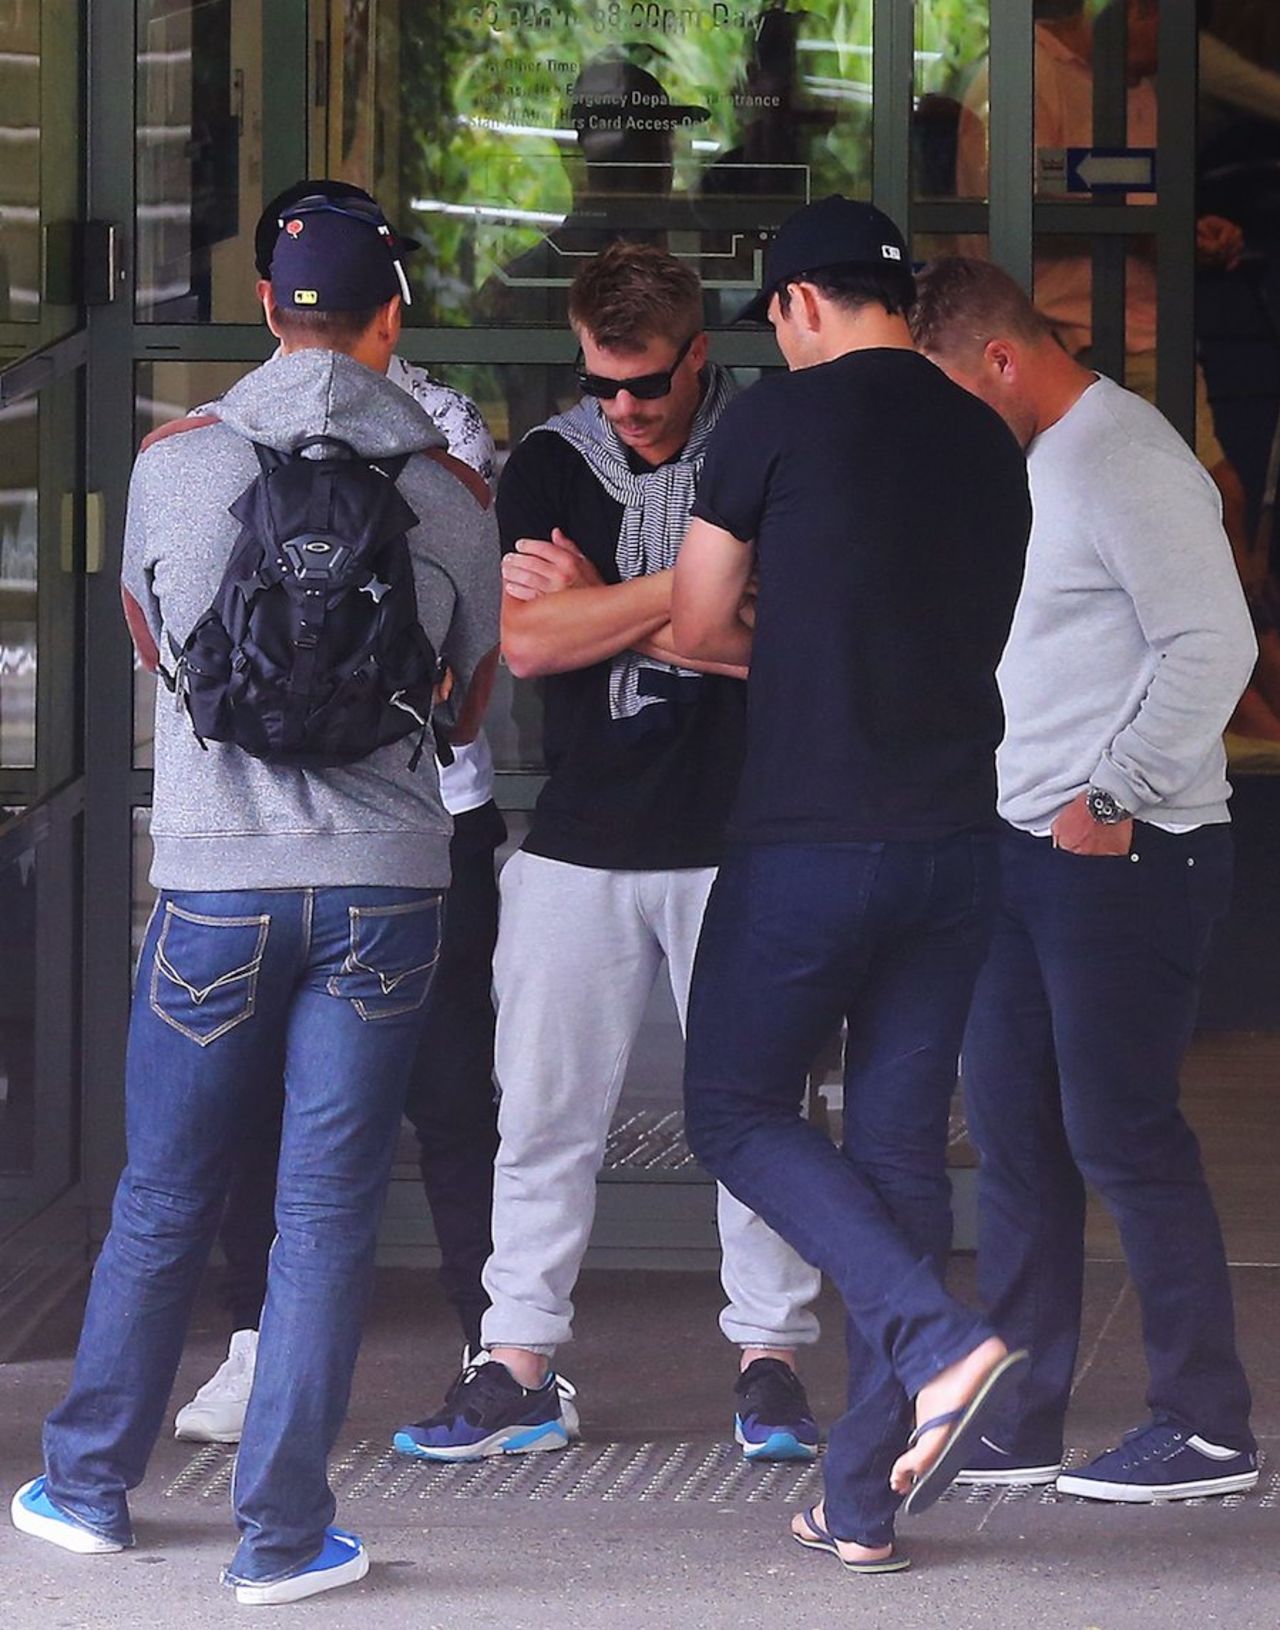 David Warner at St. Vincent's Hospital in Sydney, where Phillip Hughes was treated for a head injury, November 27, 2014